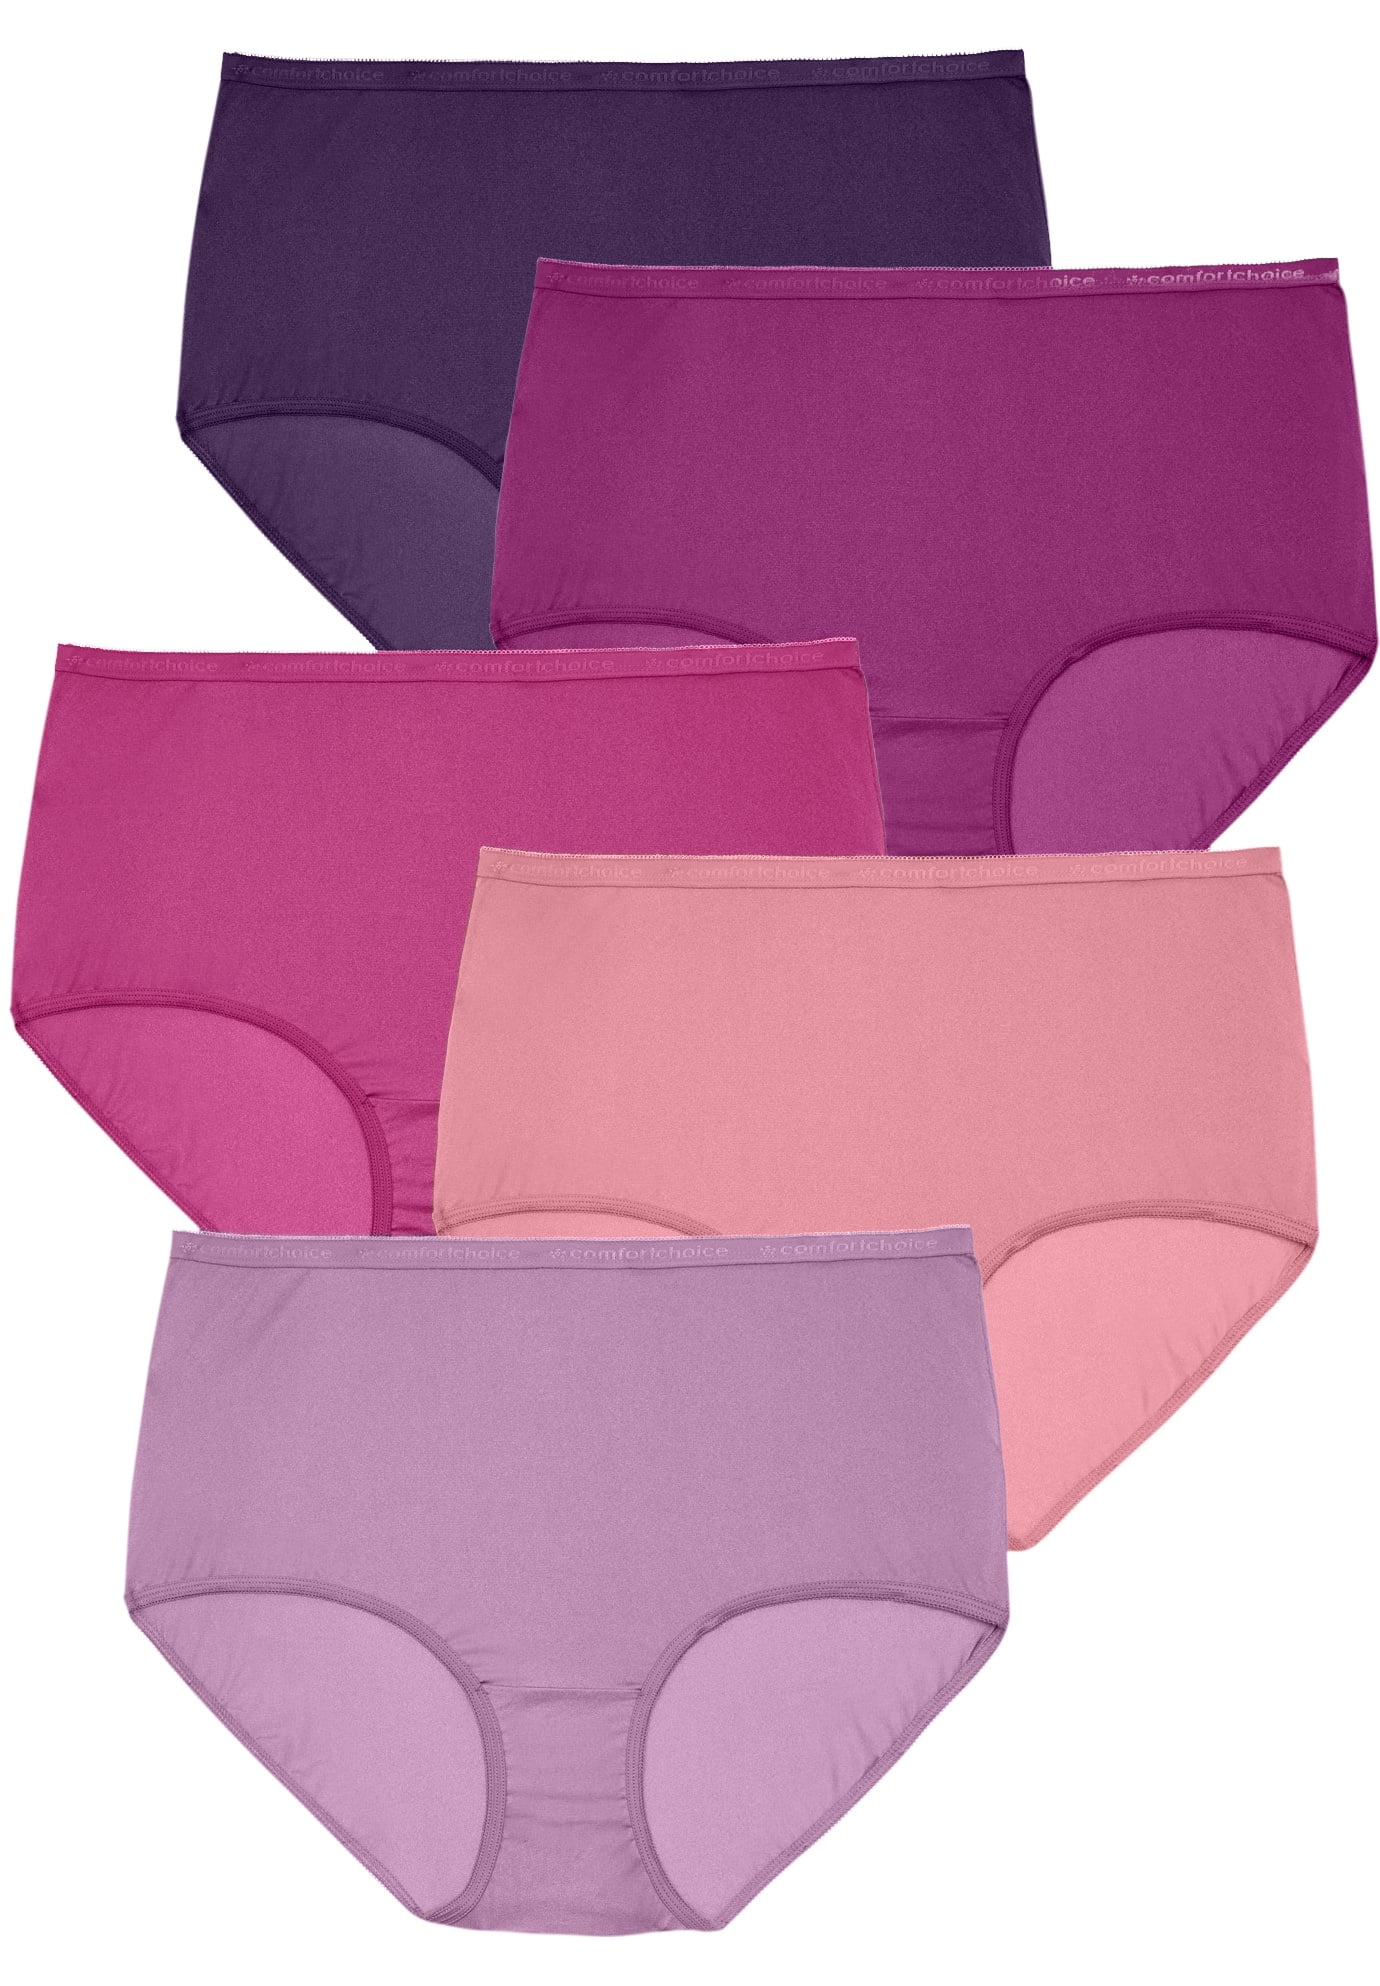 Comfort Choice Womens Plus Size 3-Pack Lace Waistband Full-Cut Brief 